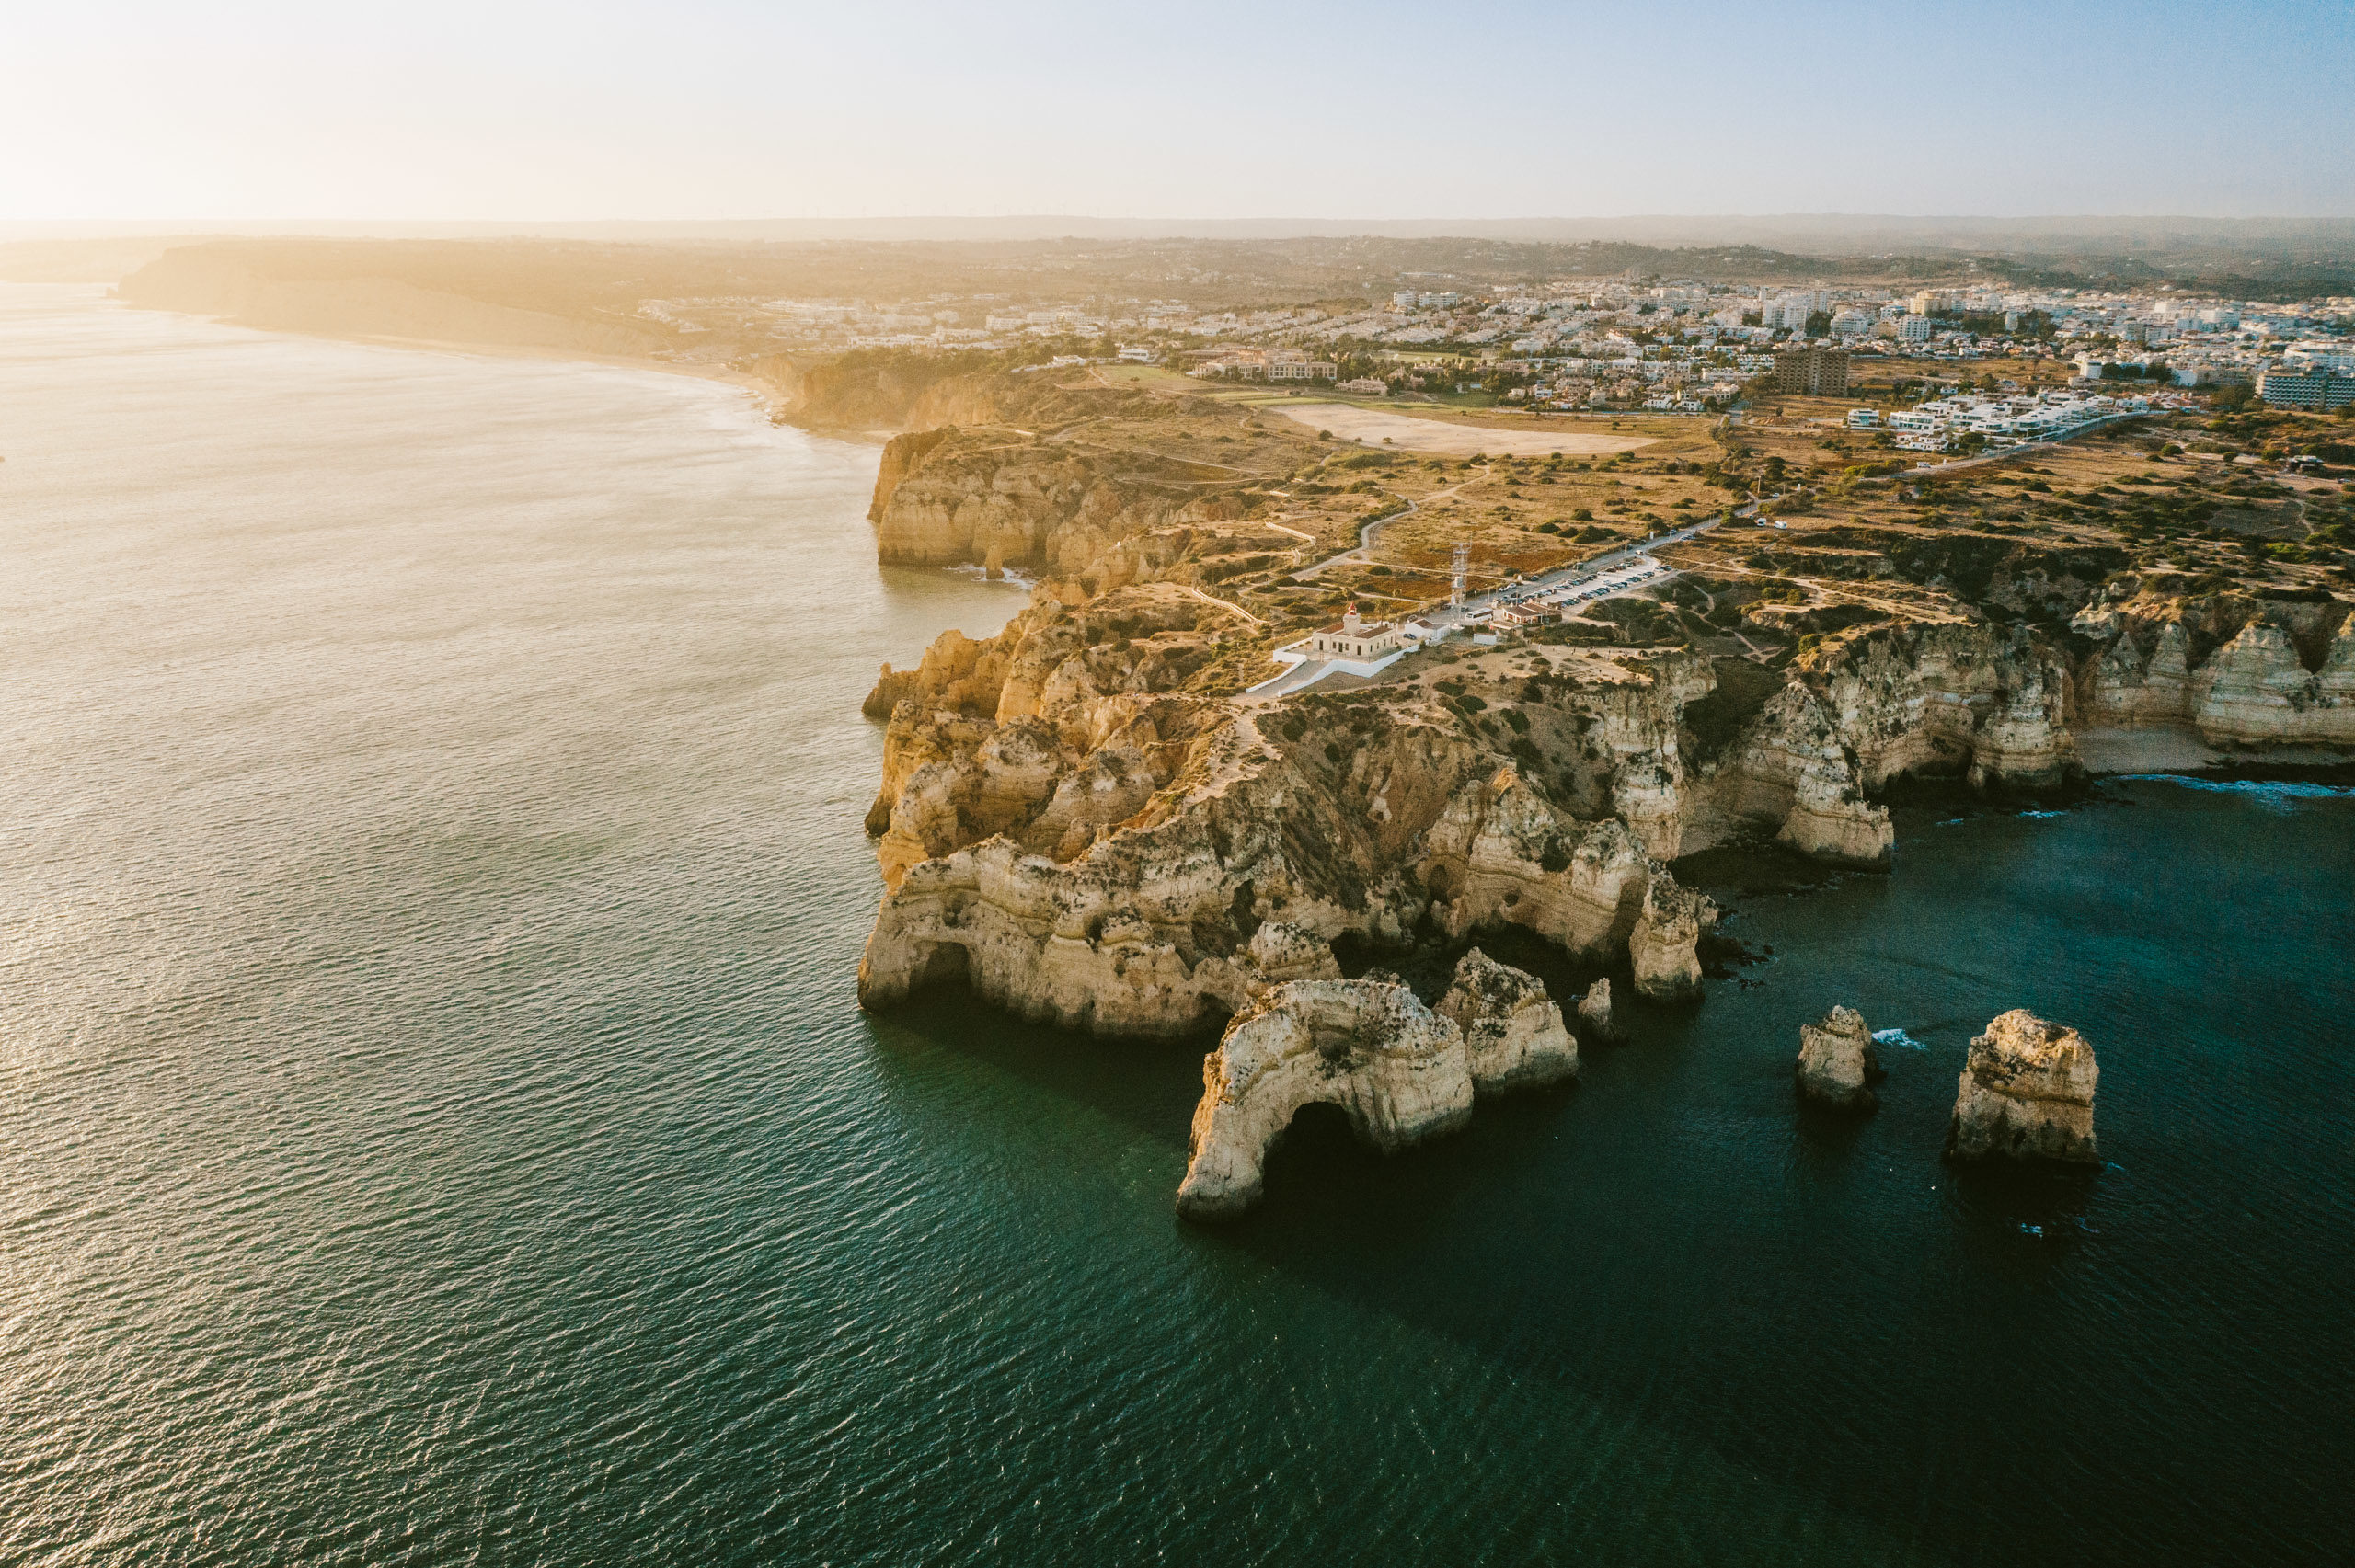 An aerial view of the Algarve Coast